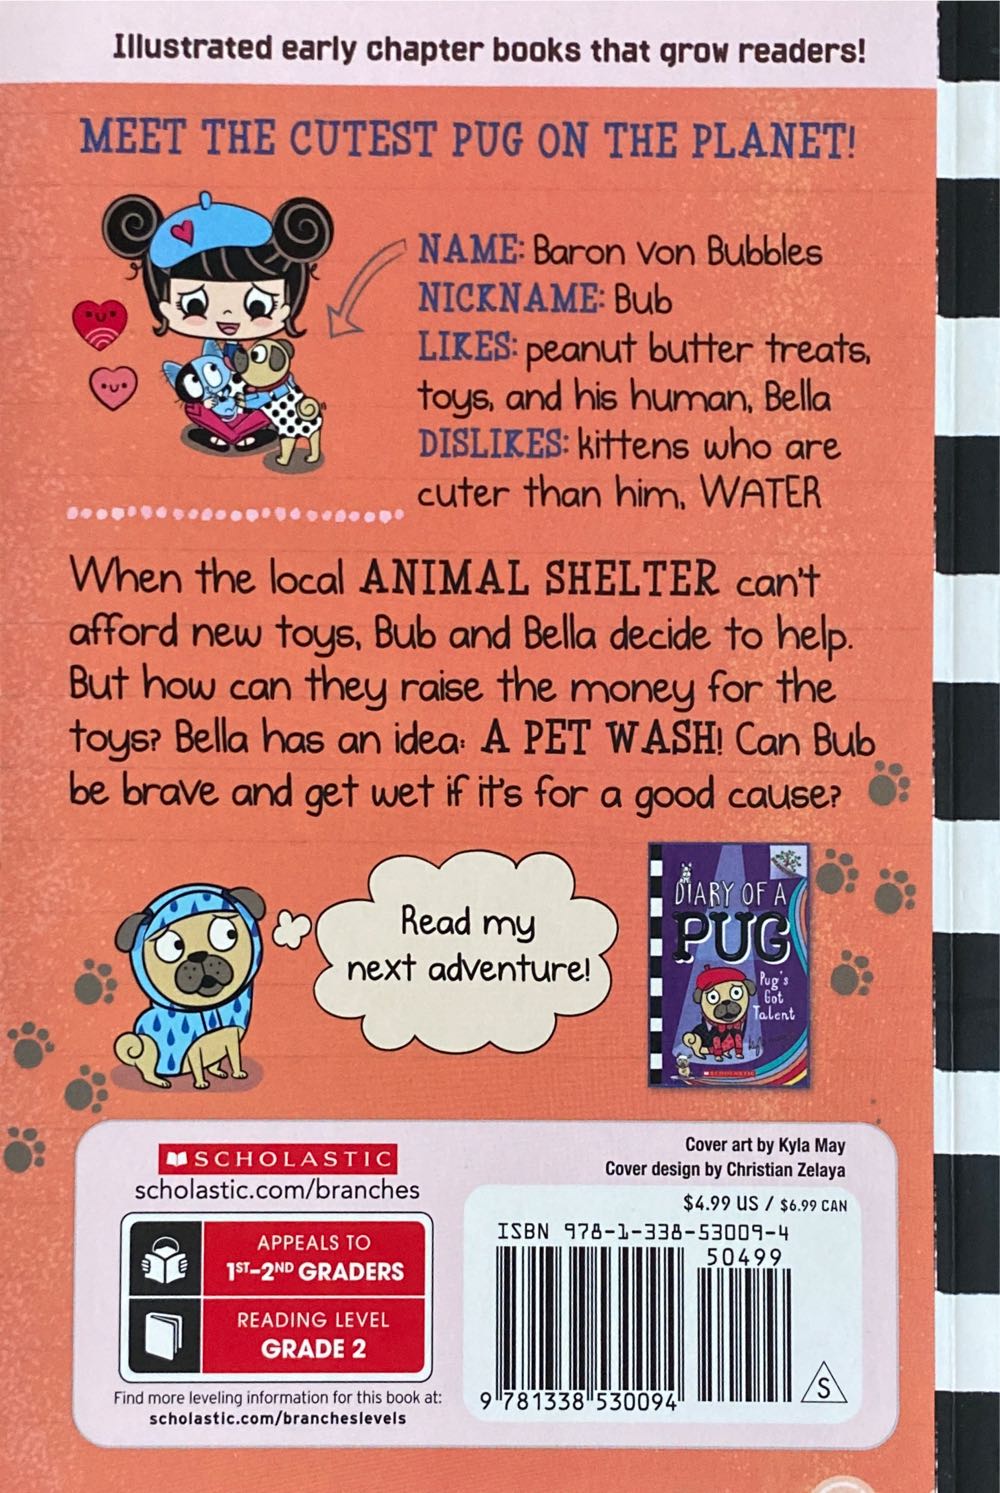 Diary Of A Pug #3: Paws For A Cause - Kyla May (Scholastic - Paperback) book collectible [Barcode 9781338530094] - Main Image 2